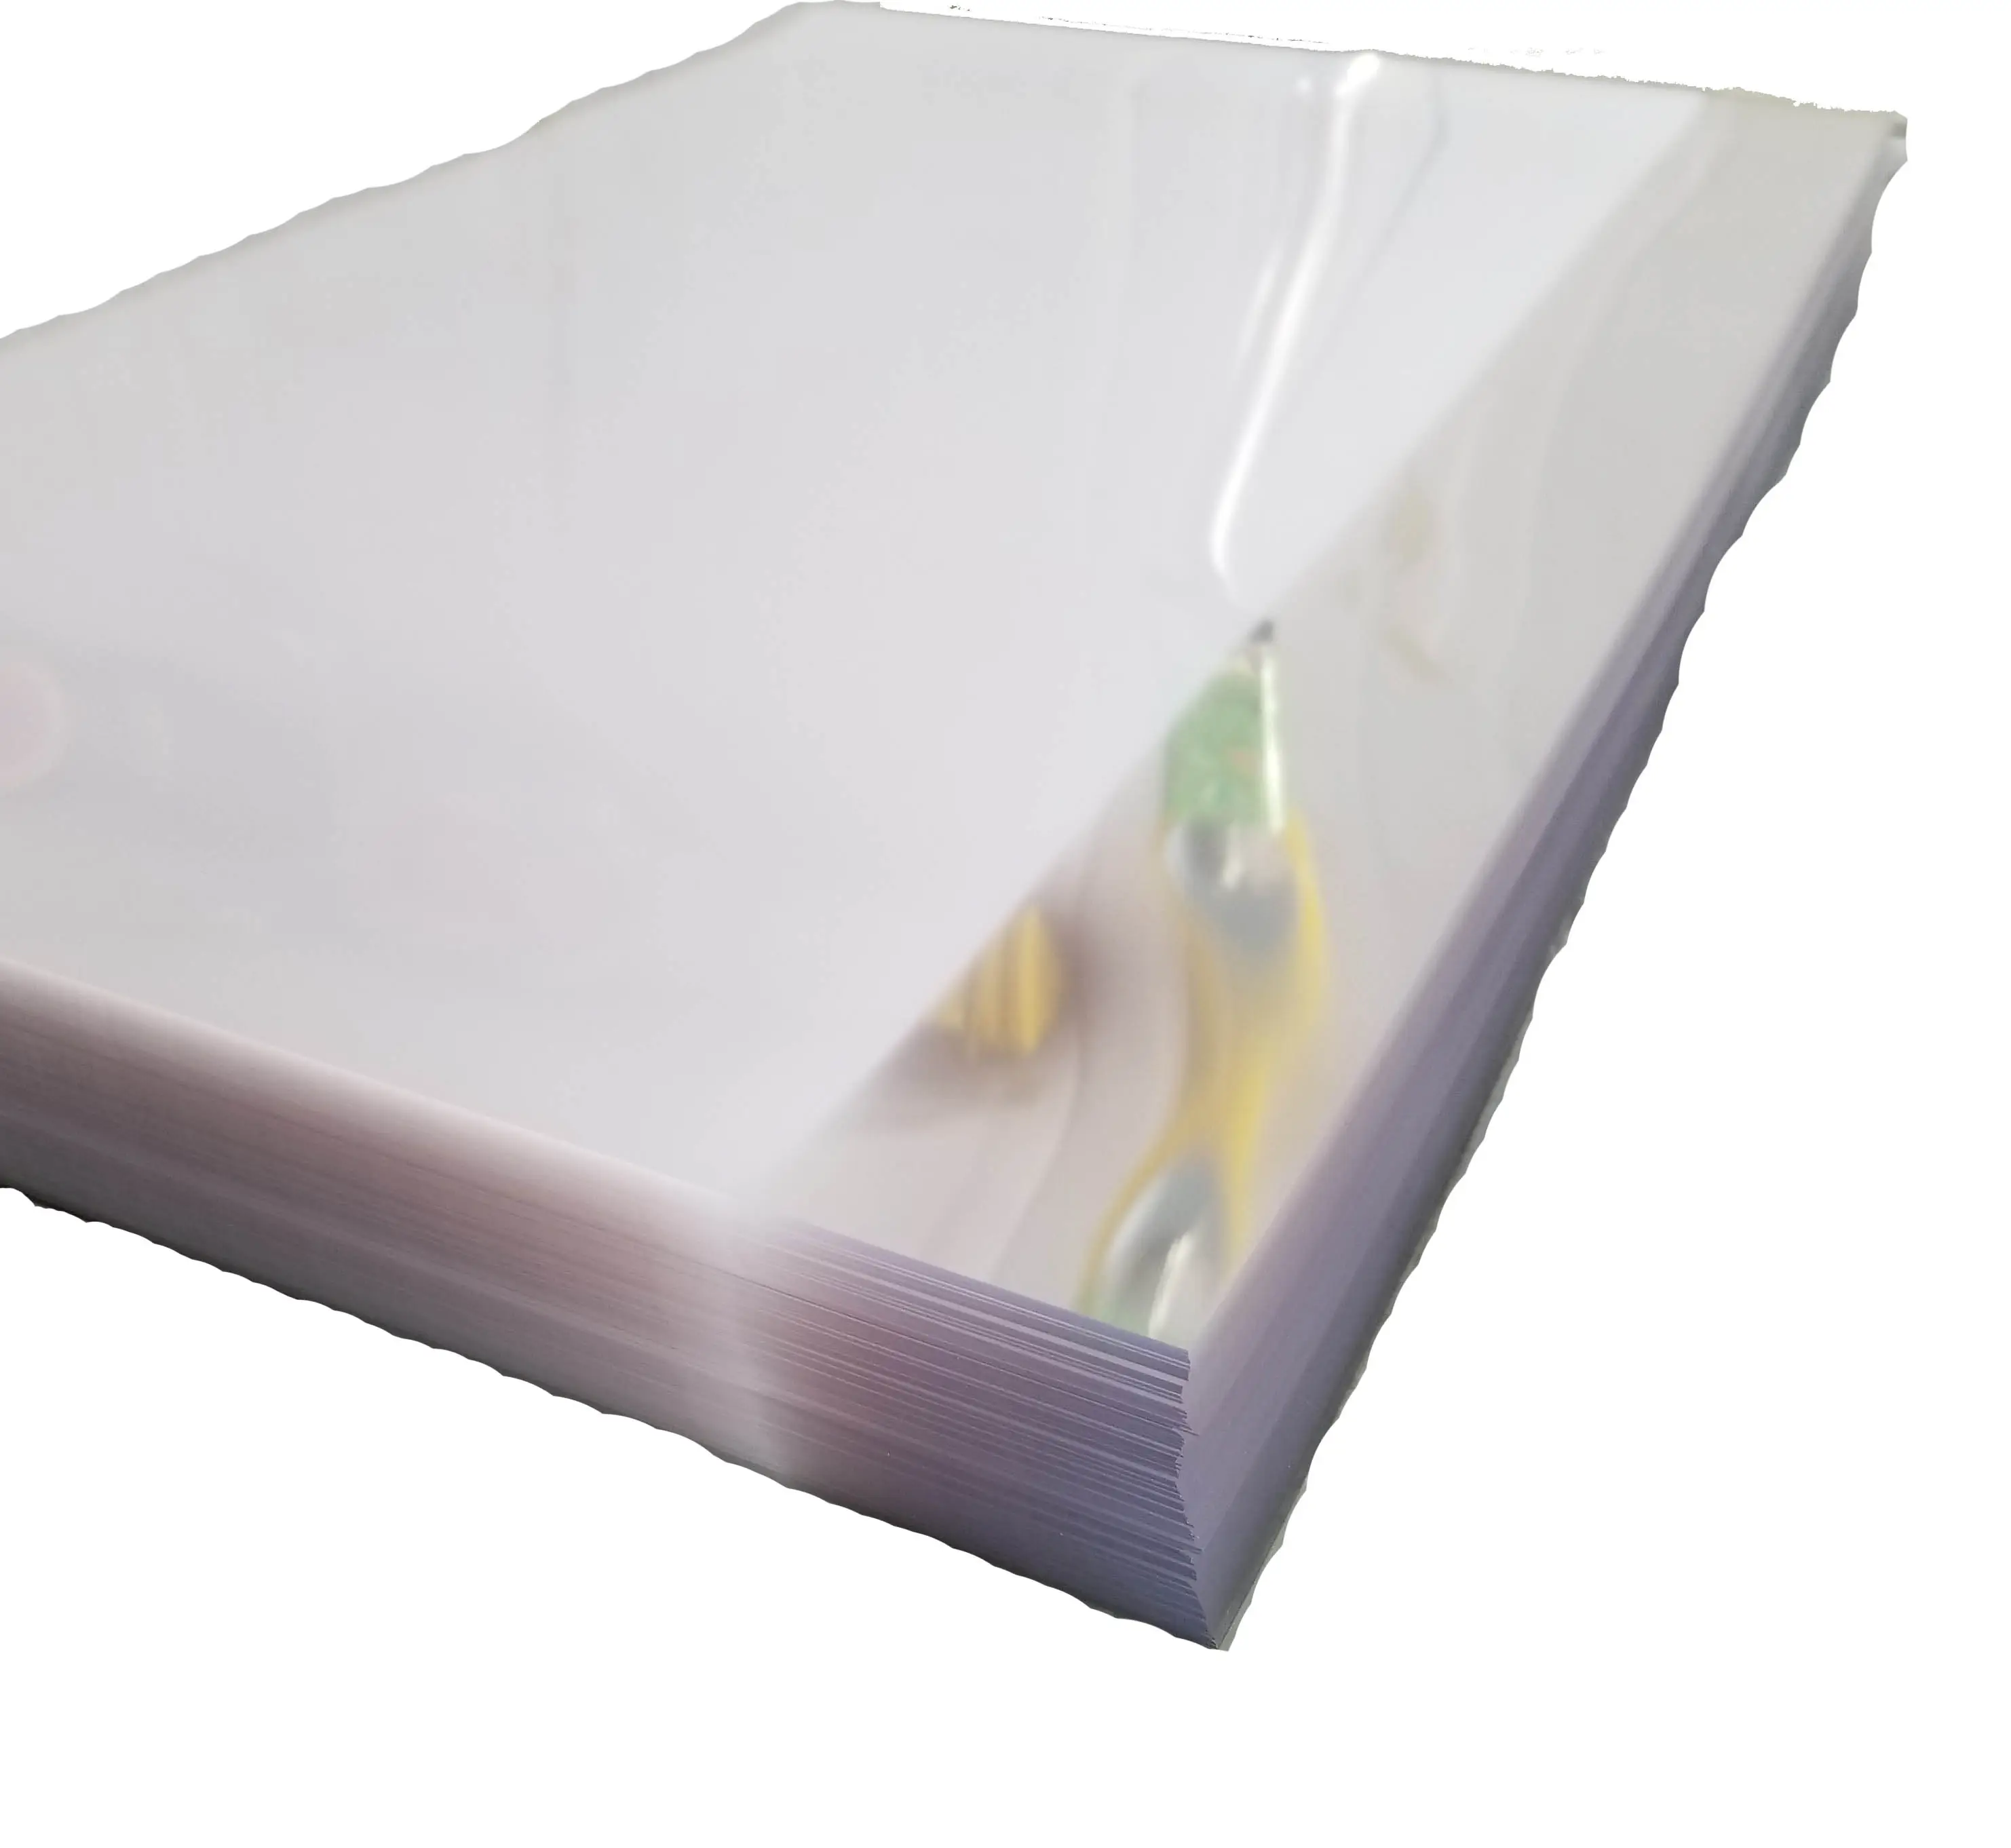 Plastic transparent pet coil anti-fogging recycled pet sheet material suppliers provide samples